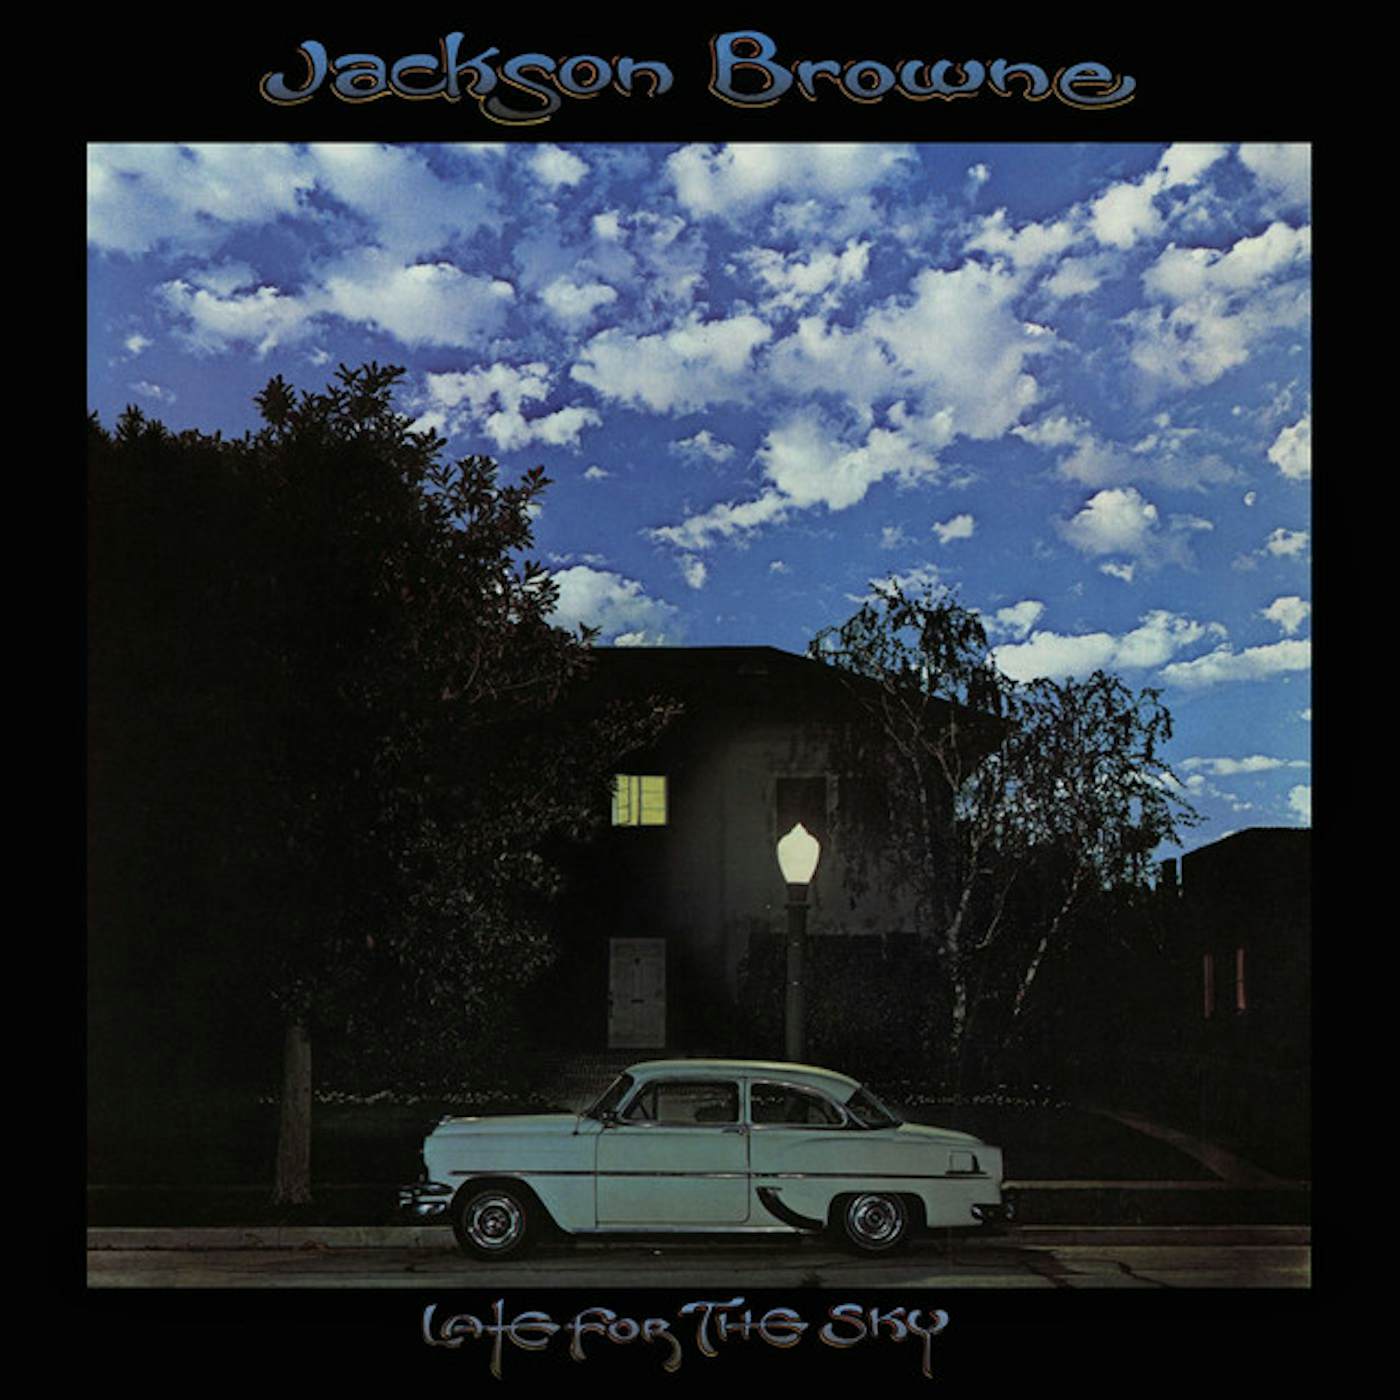 Jackson Browne Late For The Sky Vinyl Record